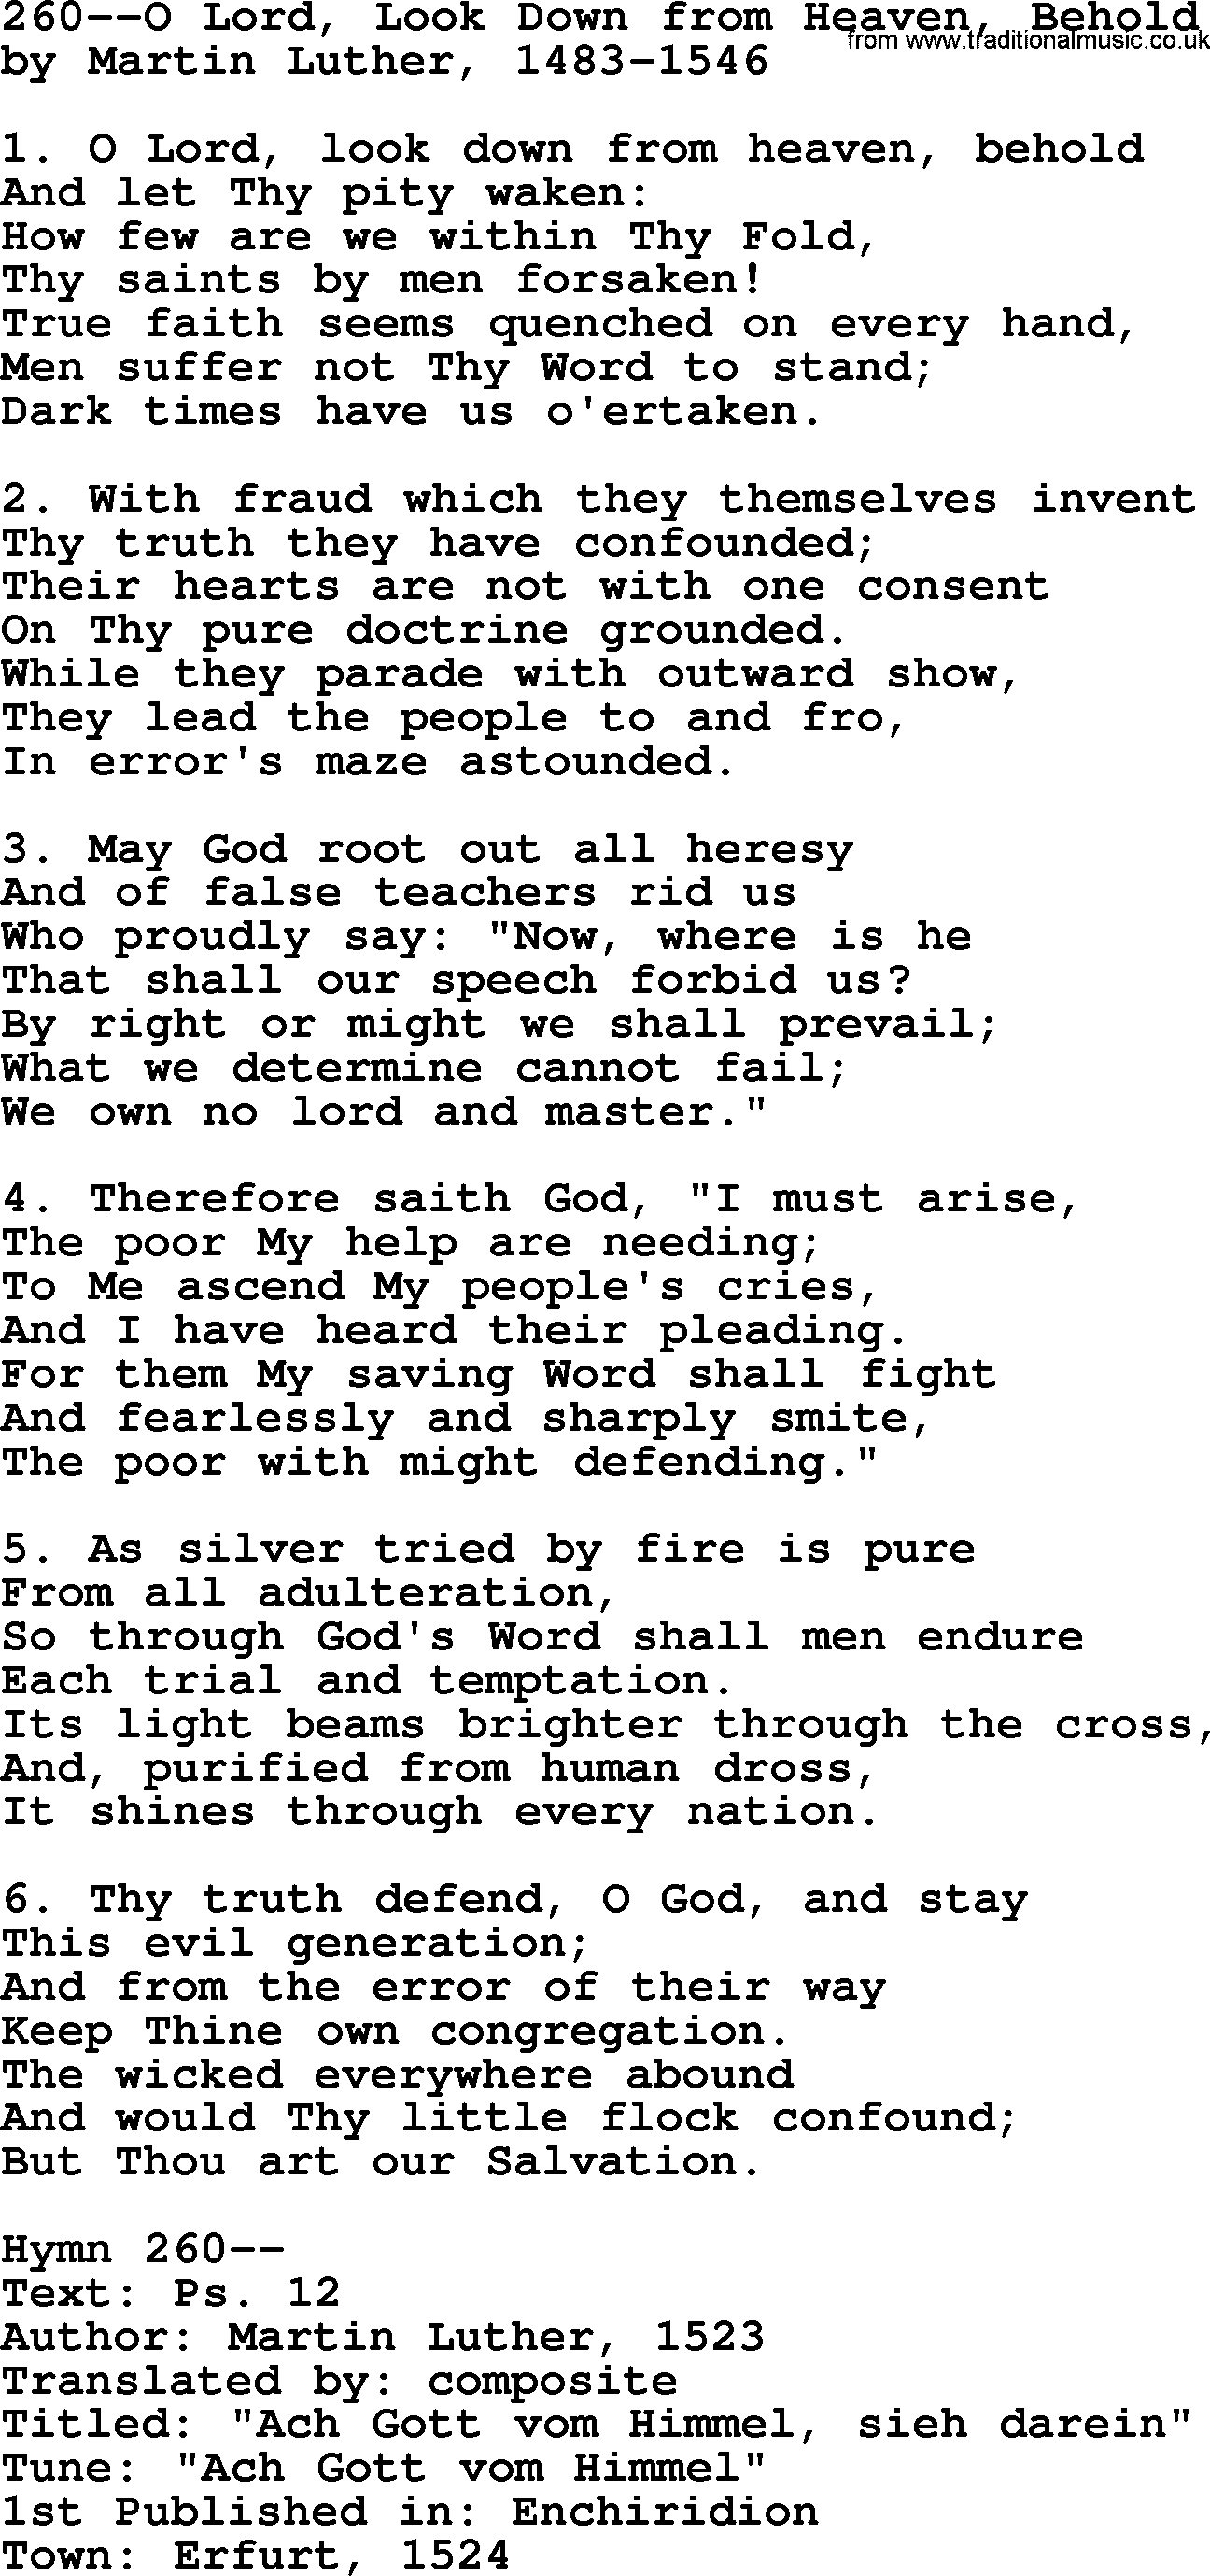 Lutheran Hymn: 260--O Lord, Look Down from Heaven, Behold.txt lyrics with PDF